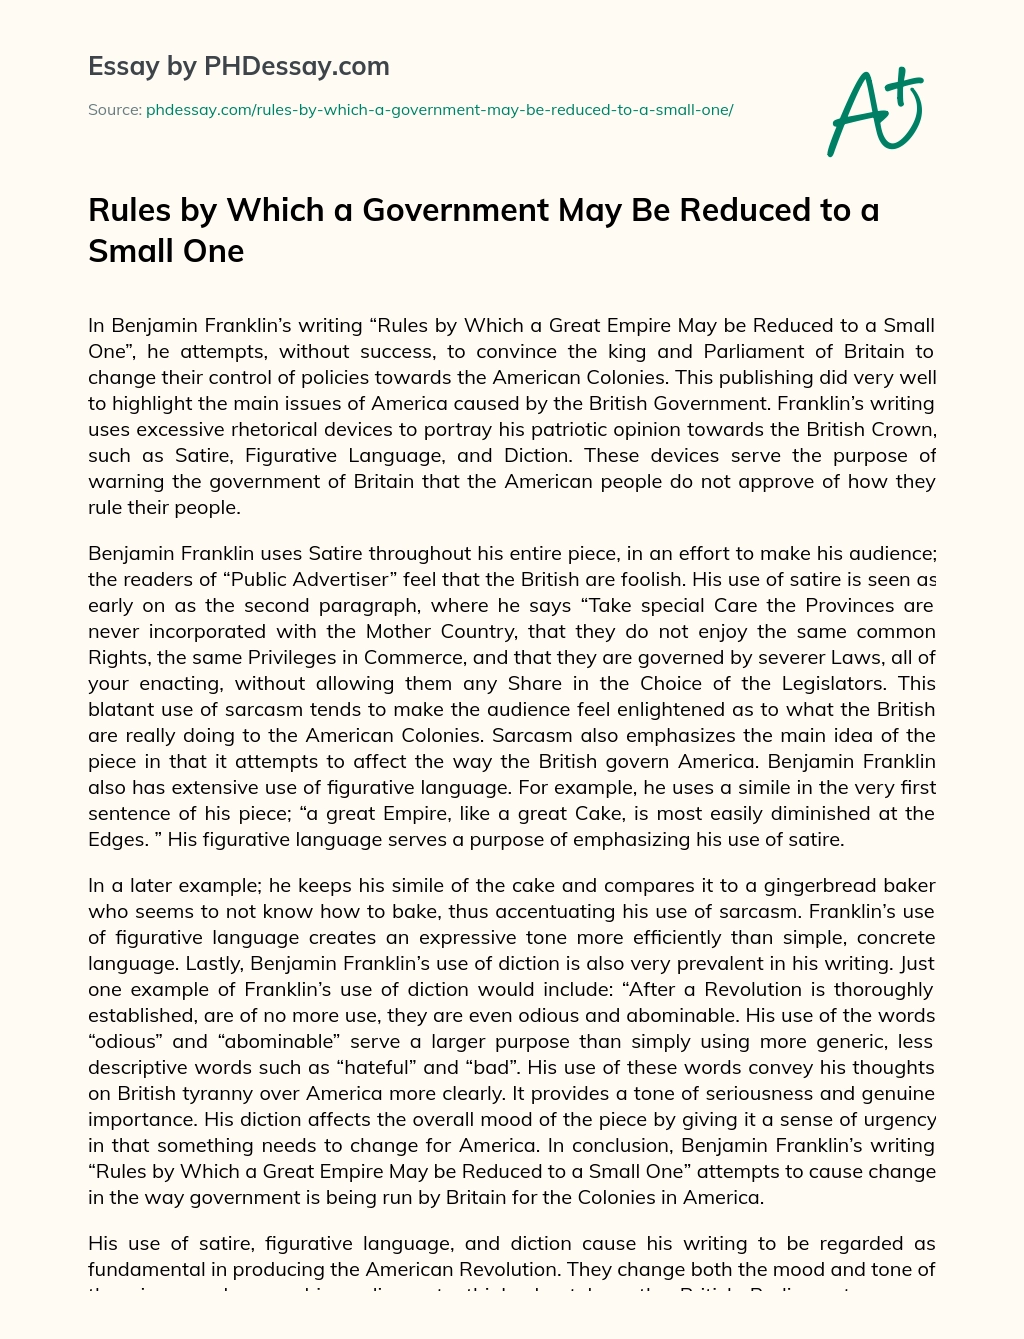 Rules by Which a Government May Be Reduced to a Small One essay